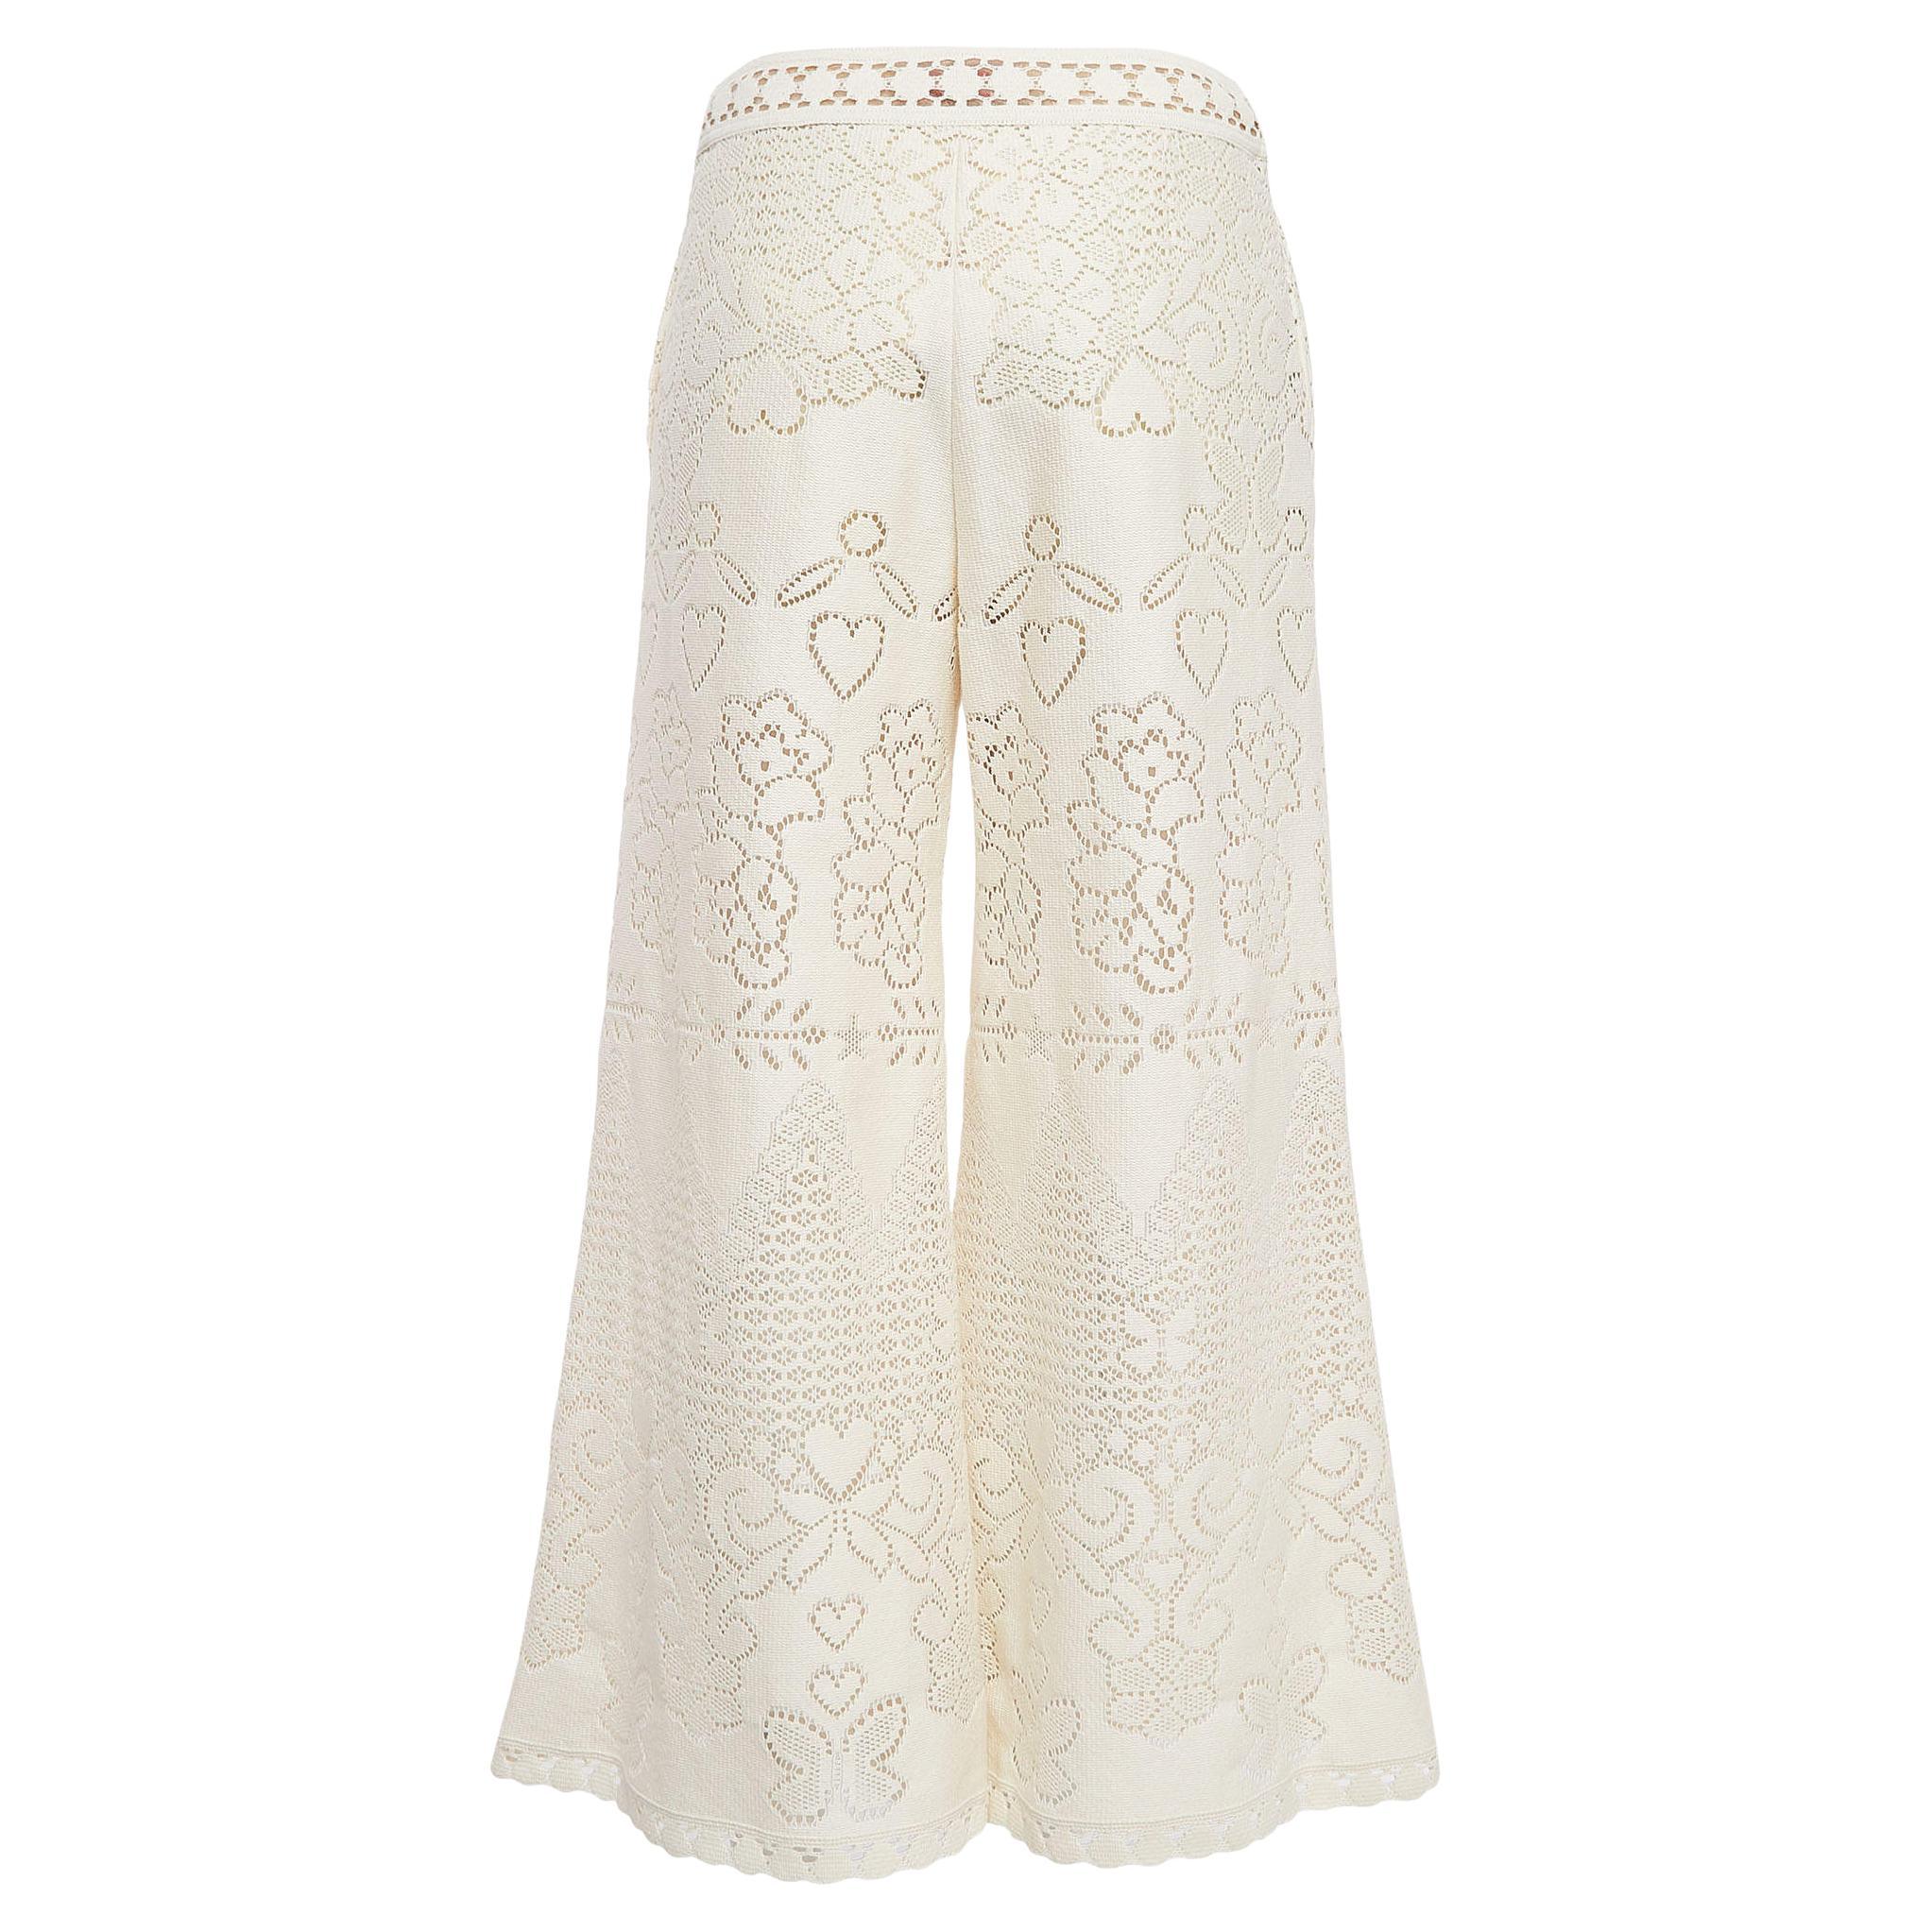 The Valentino pants epitomize chic sophistication. Crafted with meticulous attention to detail, they feature delicate eyelet knit fabric that gracefully flows with every step. Effortlessly stylish, they elevate any ensemble with their timeless